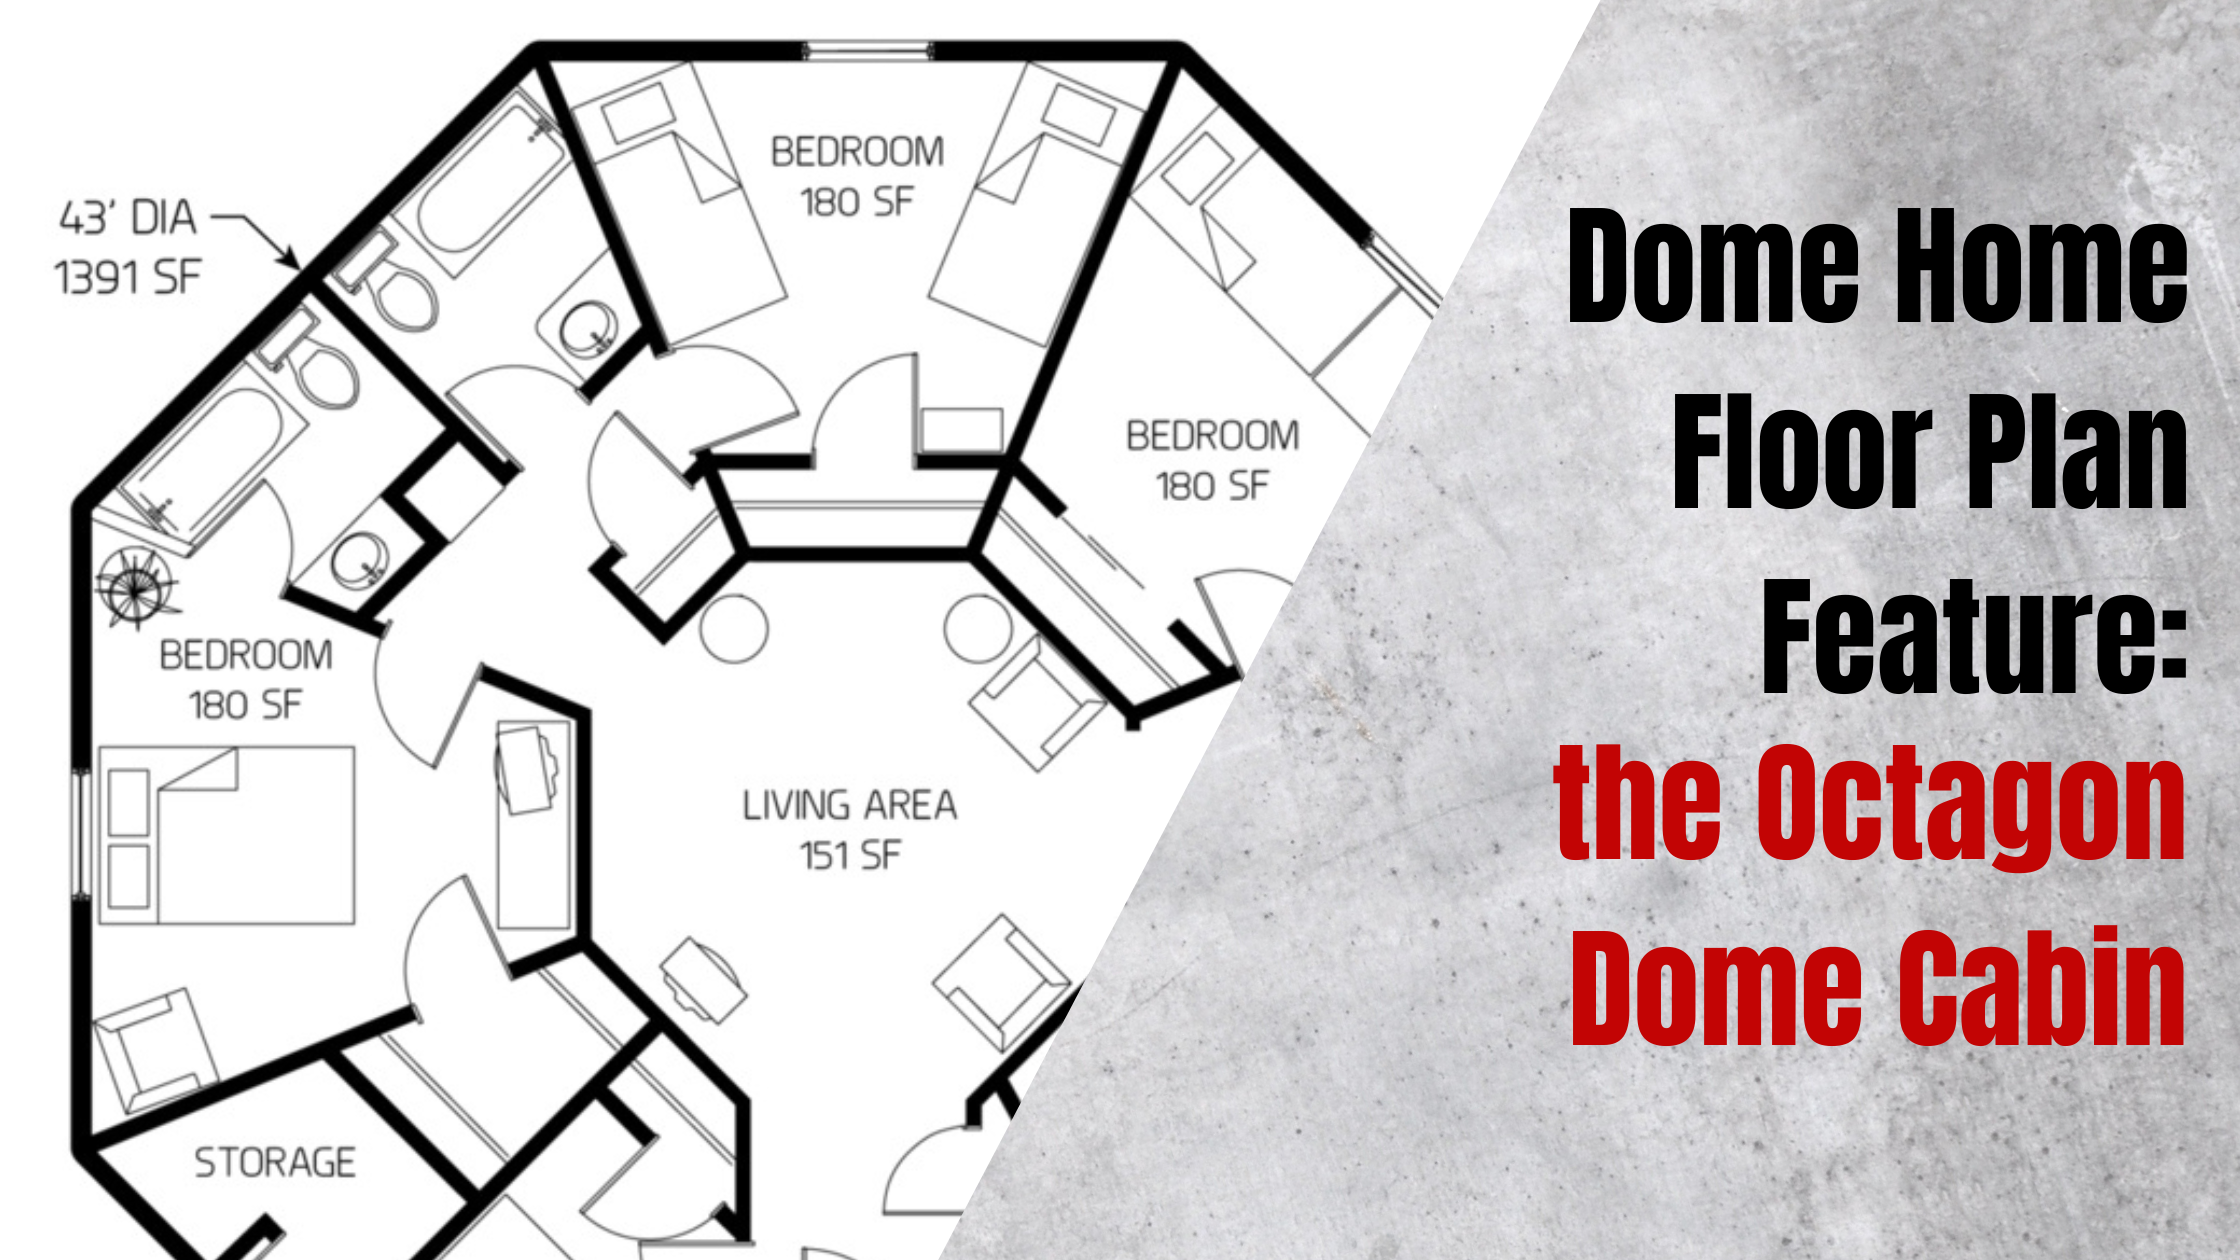 The Octagon Dome Cabin, a beautiful 4-bedroom floor plan that shows the versatility of concrete dome homes.